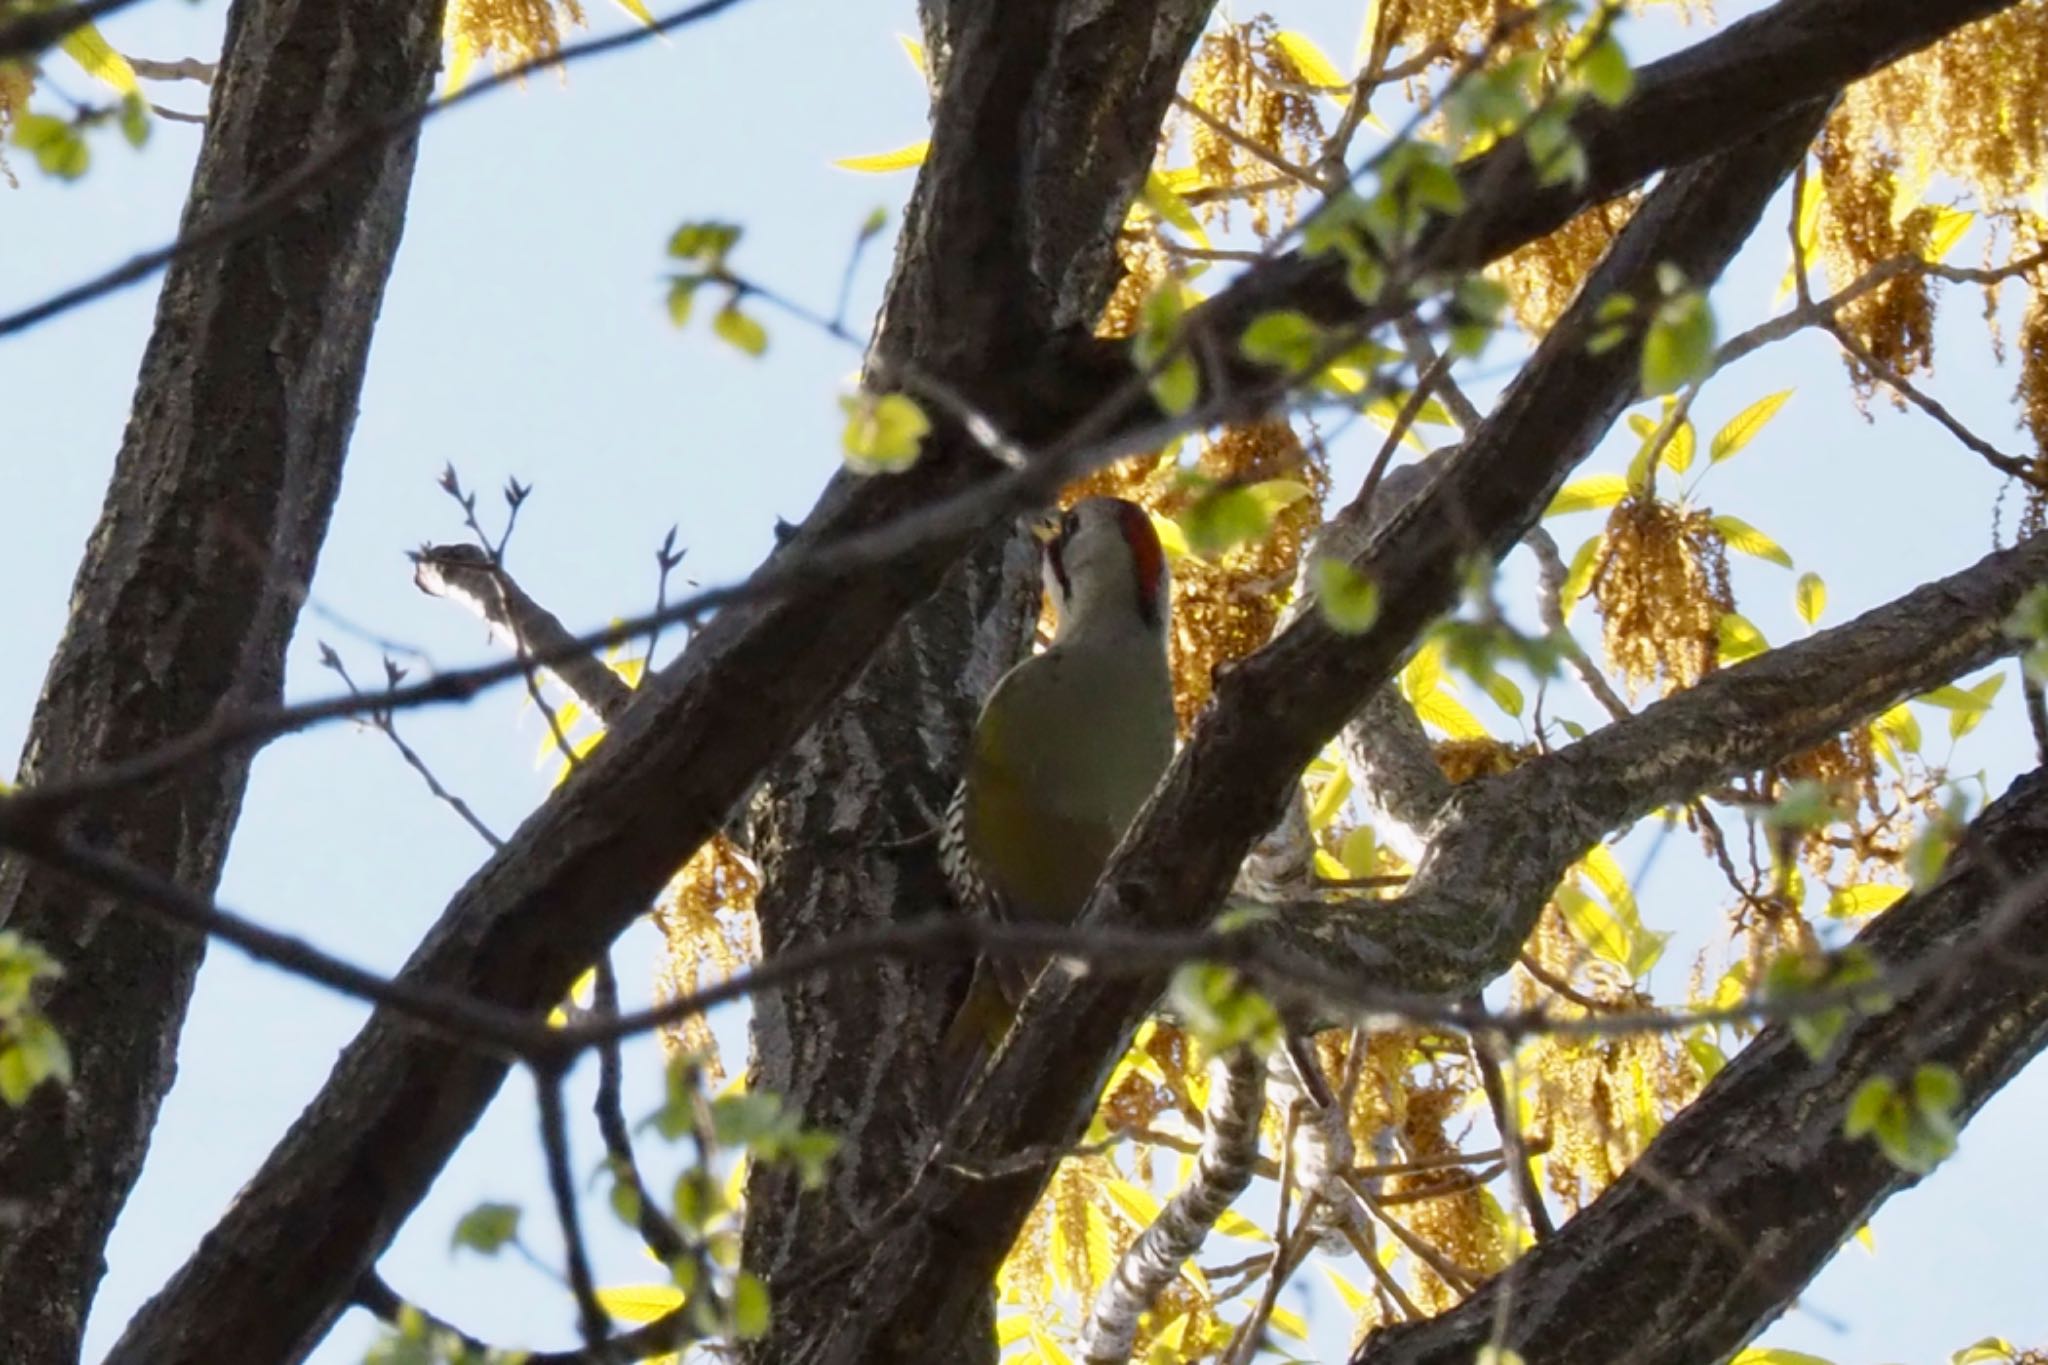 Photo of Japanese Green Woodpecker at 大塚・歳勝土遺跡公園 by ぬま